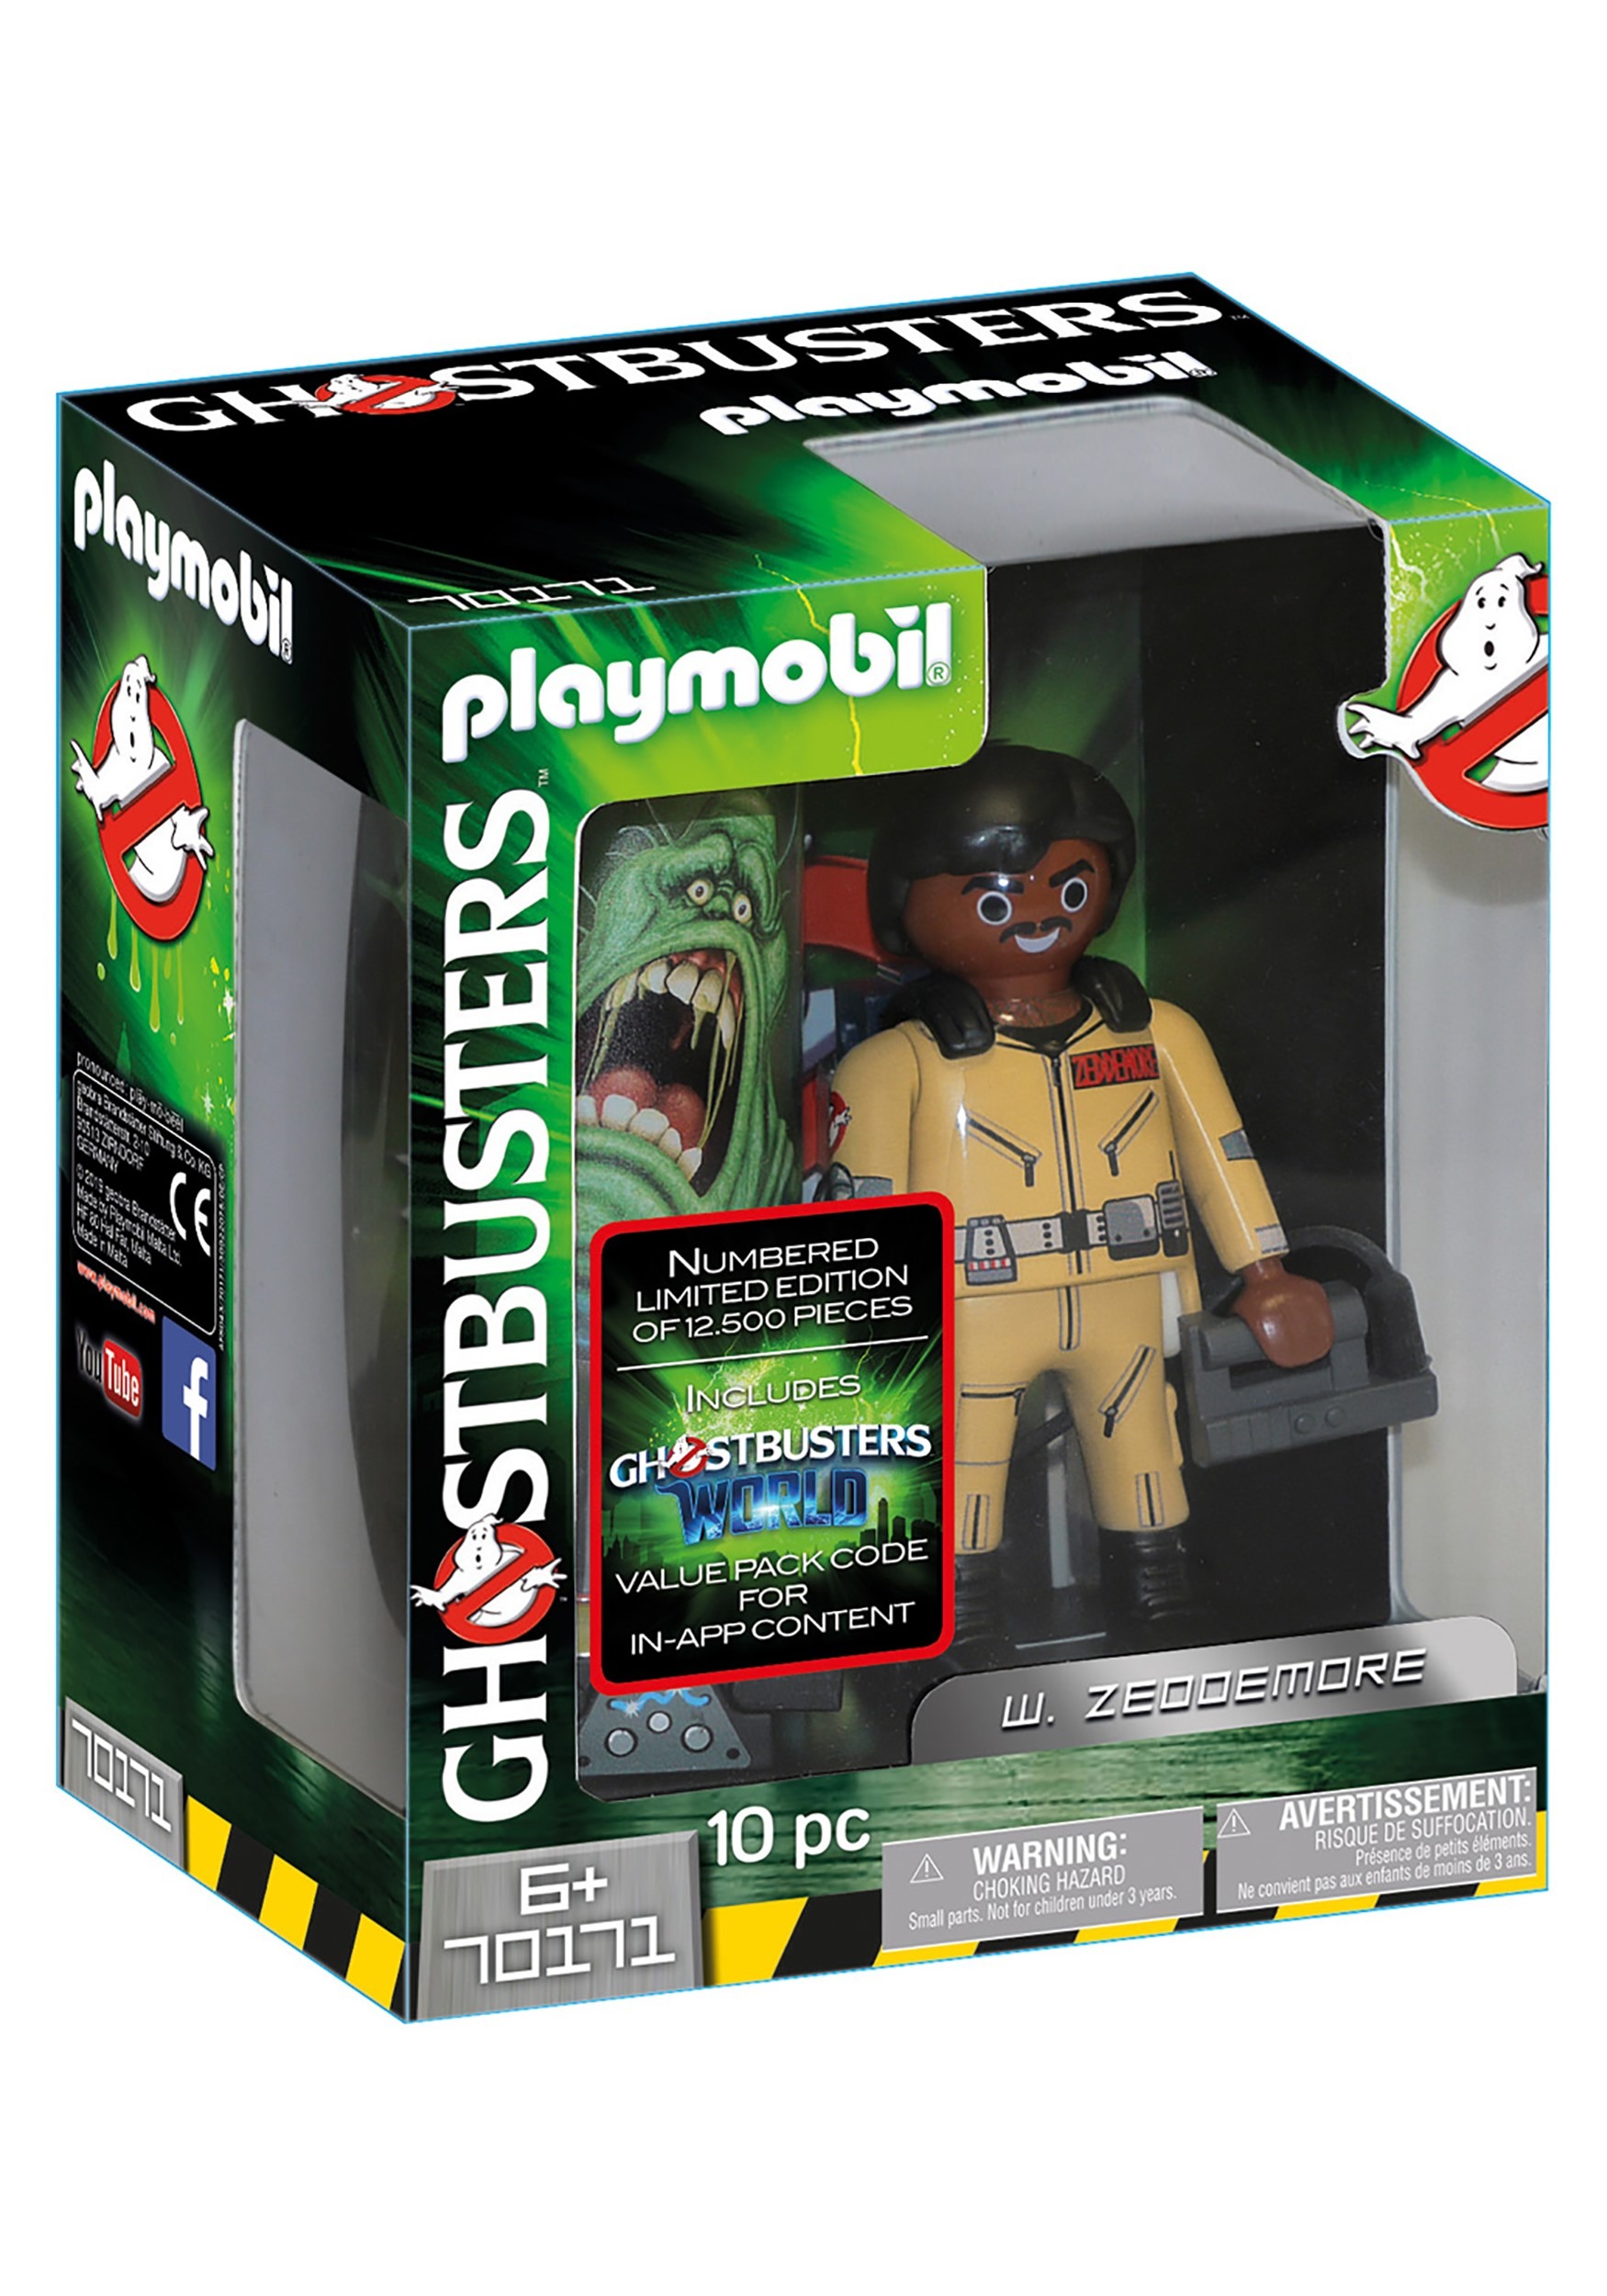 Collectors Edition Playmobil Ghostbusters W. Zeddemore Figure